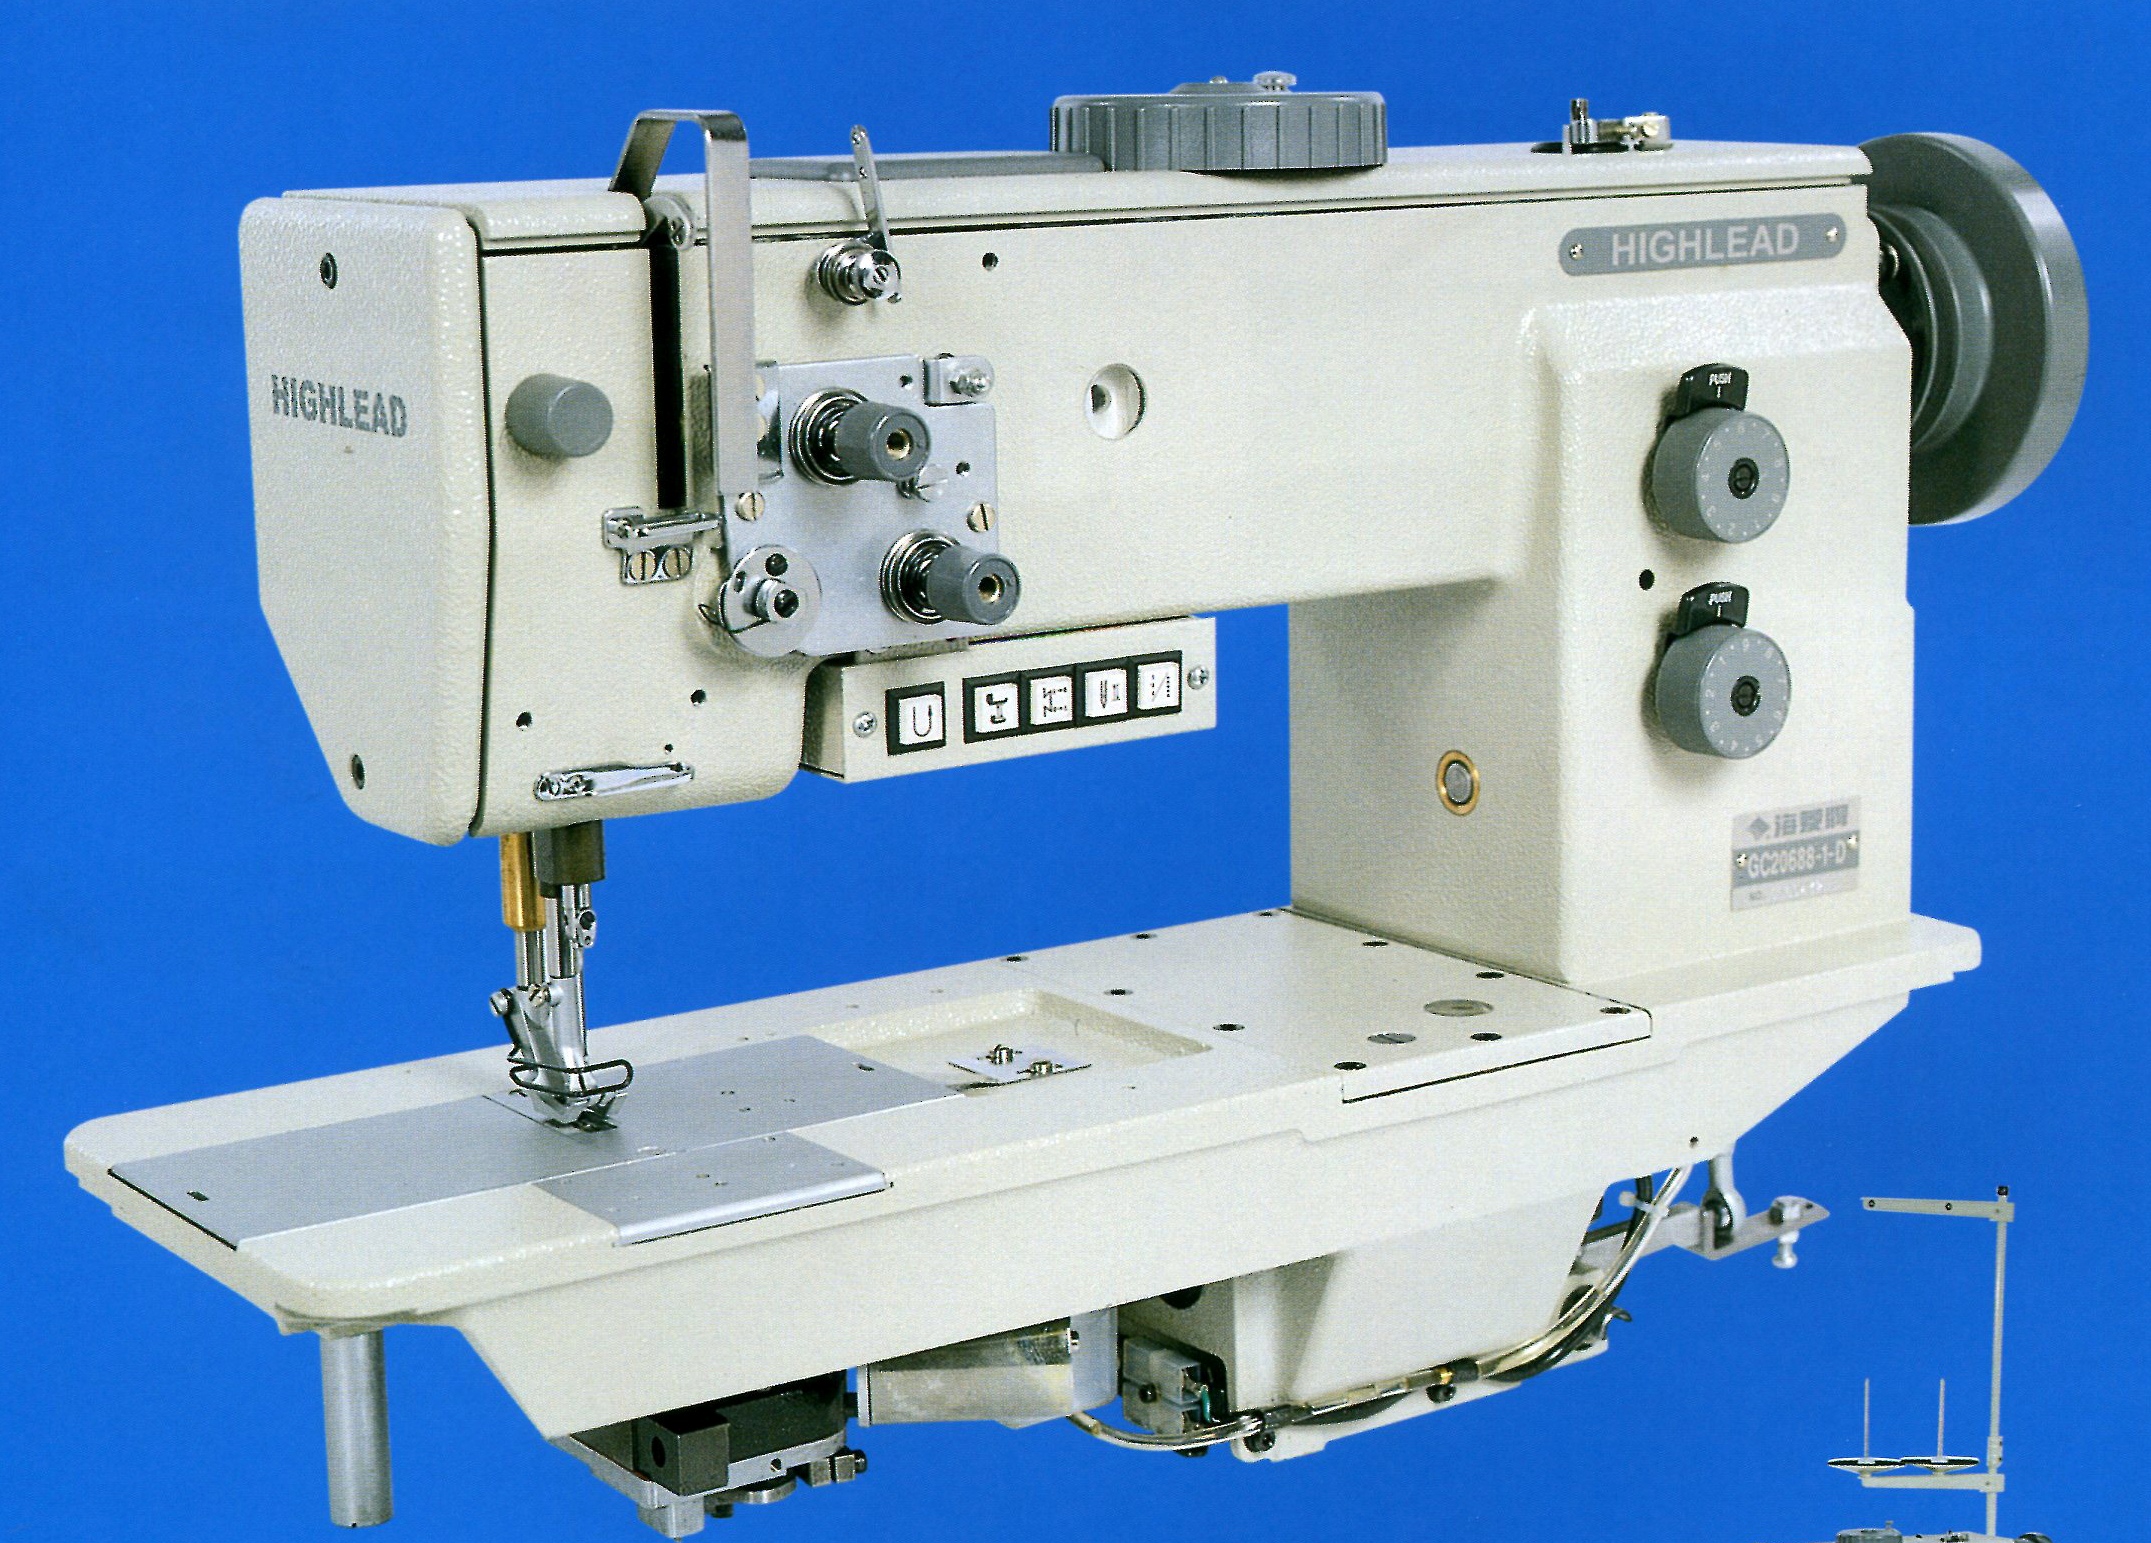 Highlead GC20688 Sewing Machine